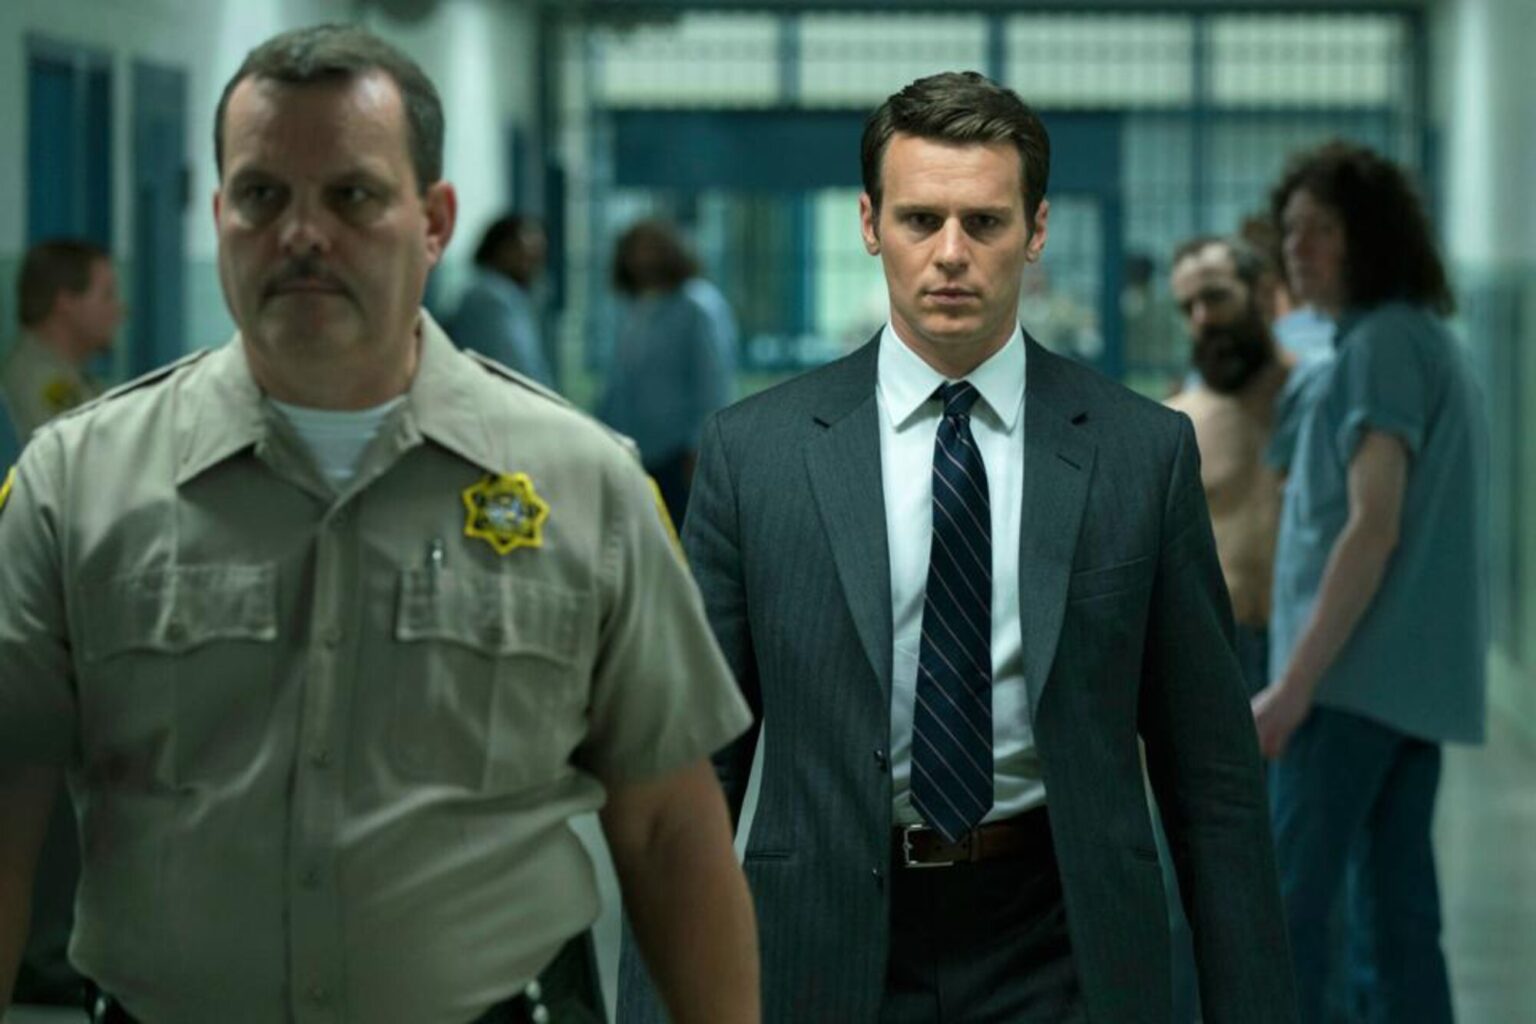 The next season of 'Mindhunter' is in limbo. Will we ever see 'Mindhunter' season 3 or is it gone forever?